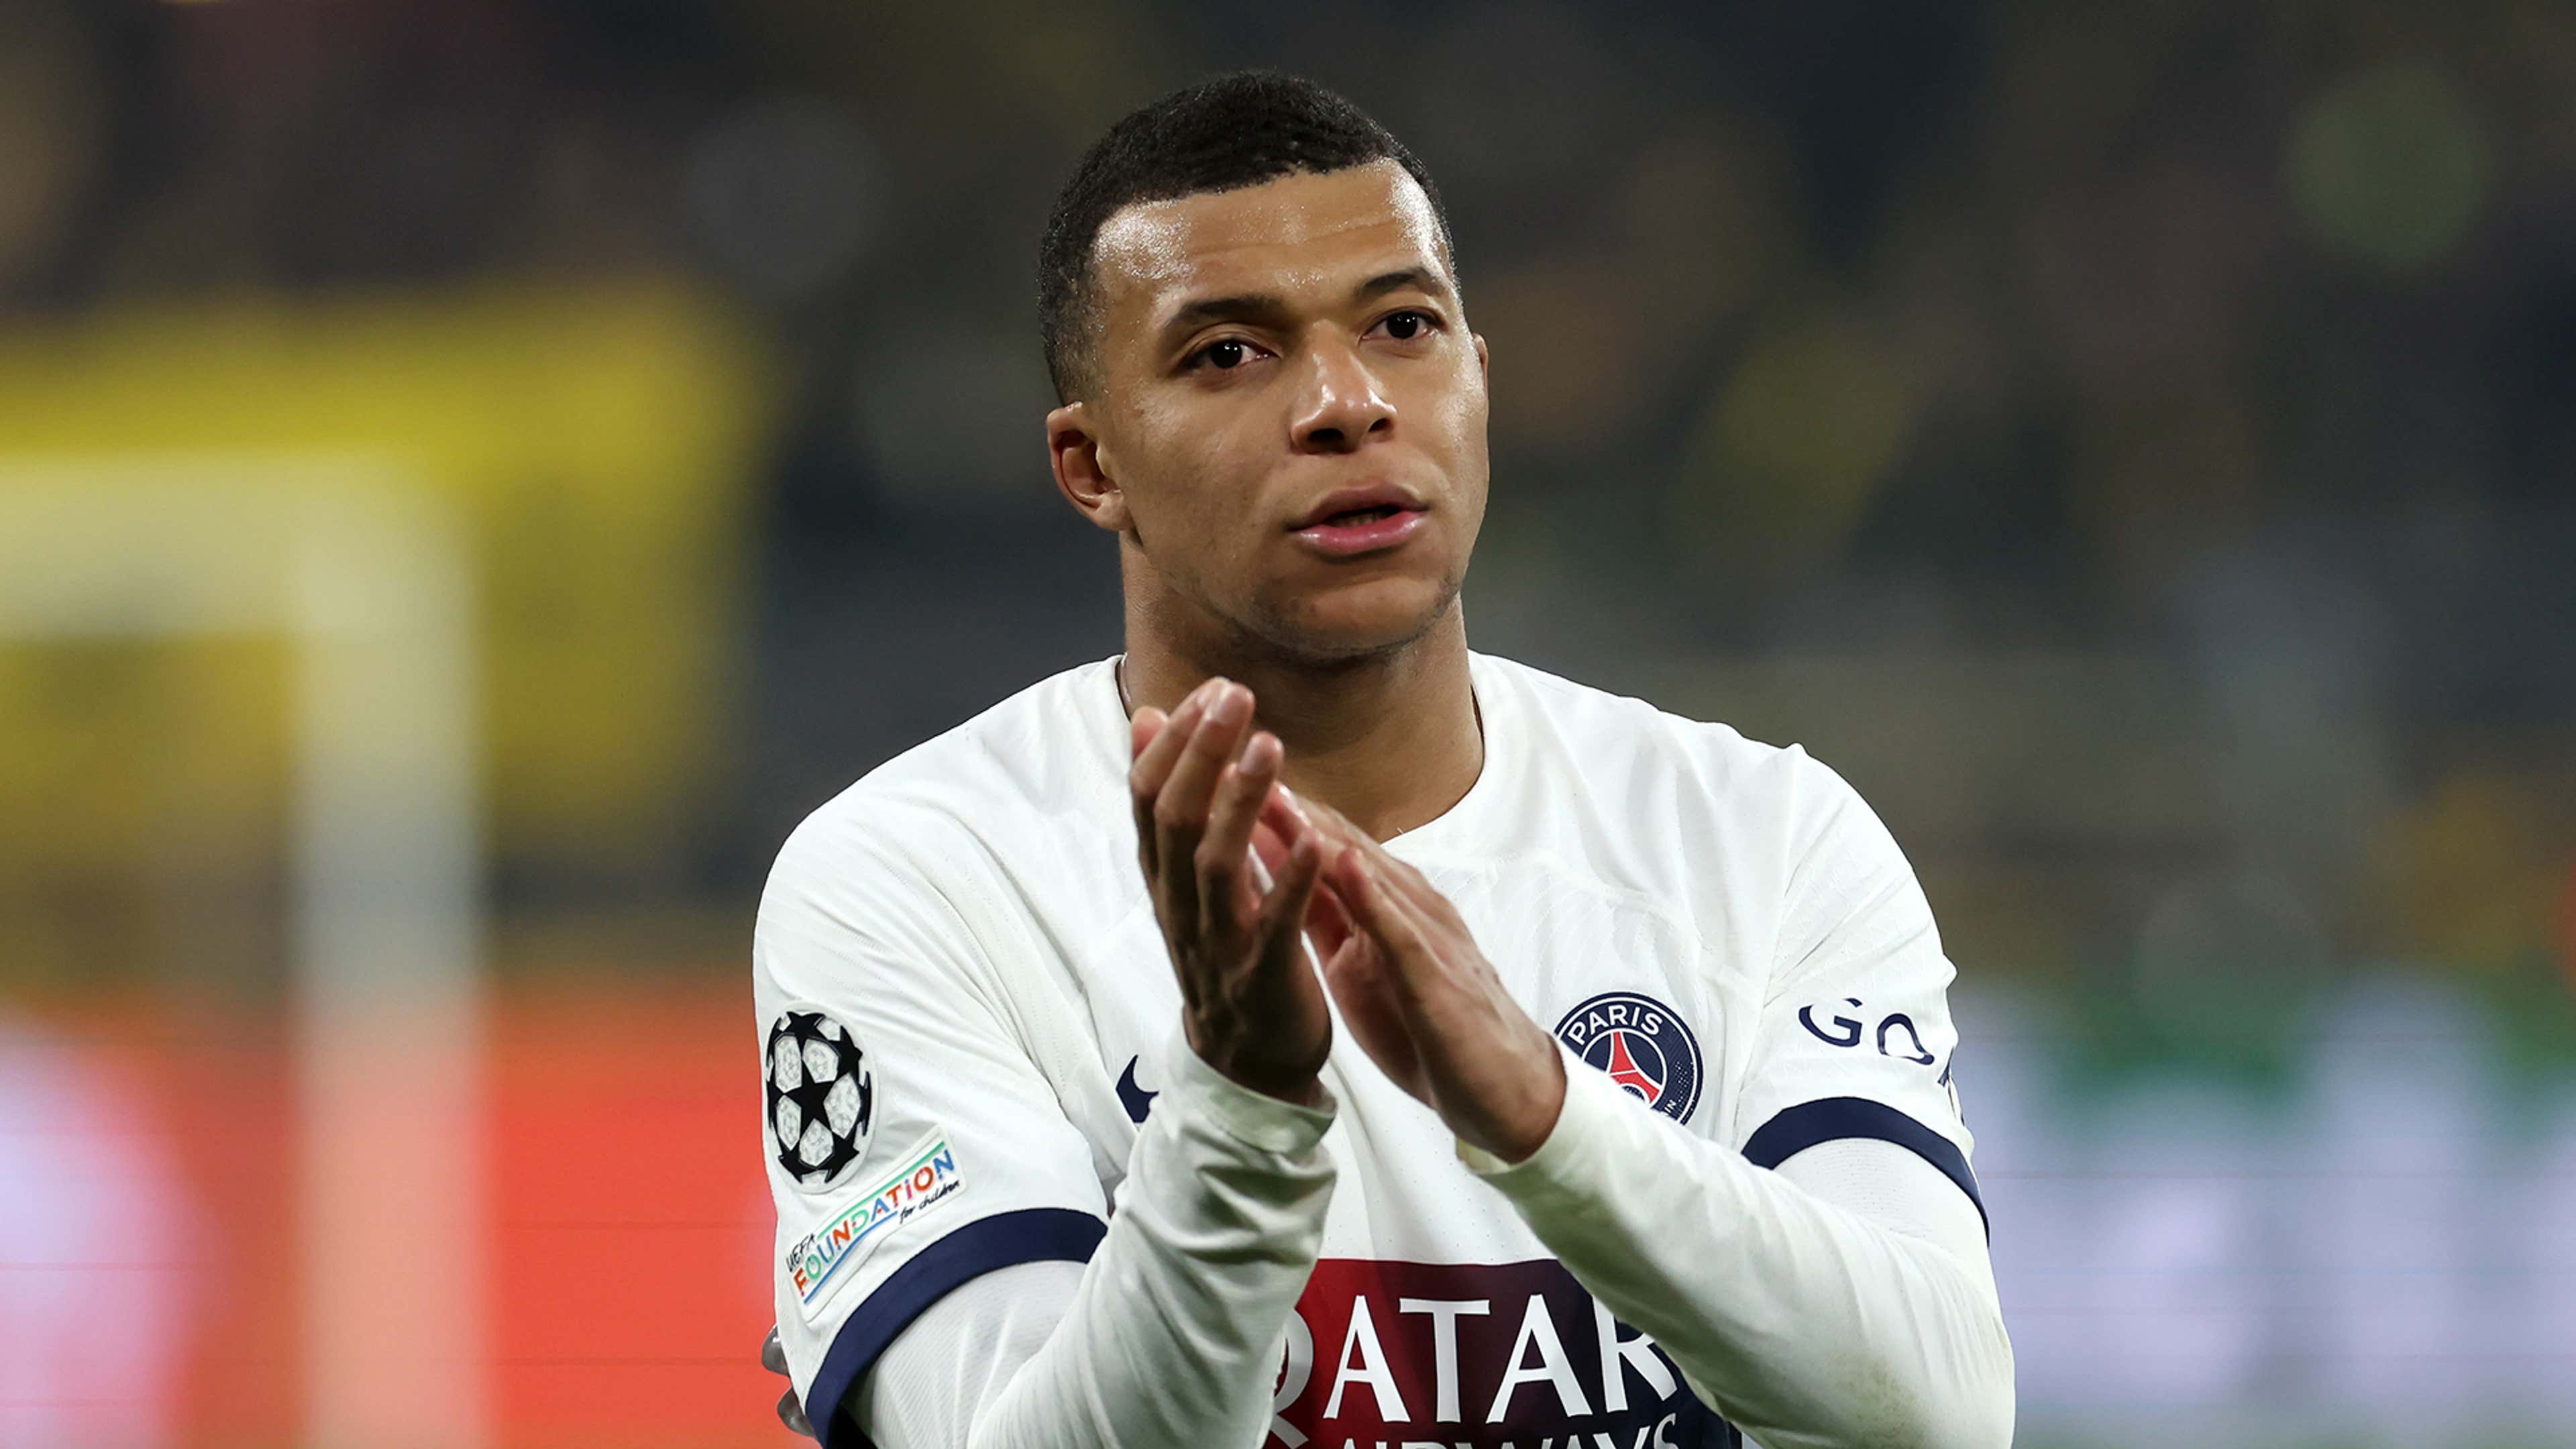 Revealed: PSG's staggering 'pyramids of Egypt' contract offer to Kylian  Mbappe that Real Madrid haven't come even close to matching